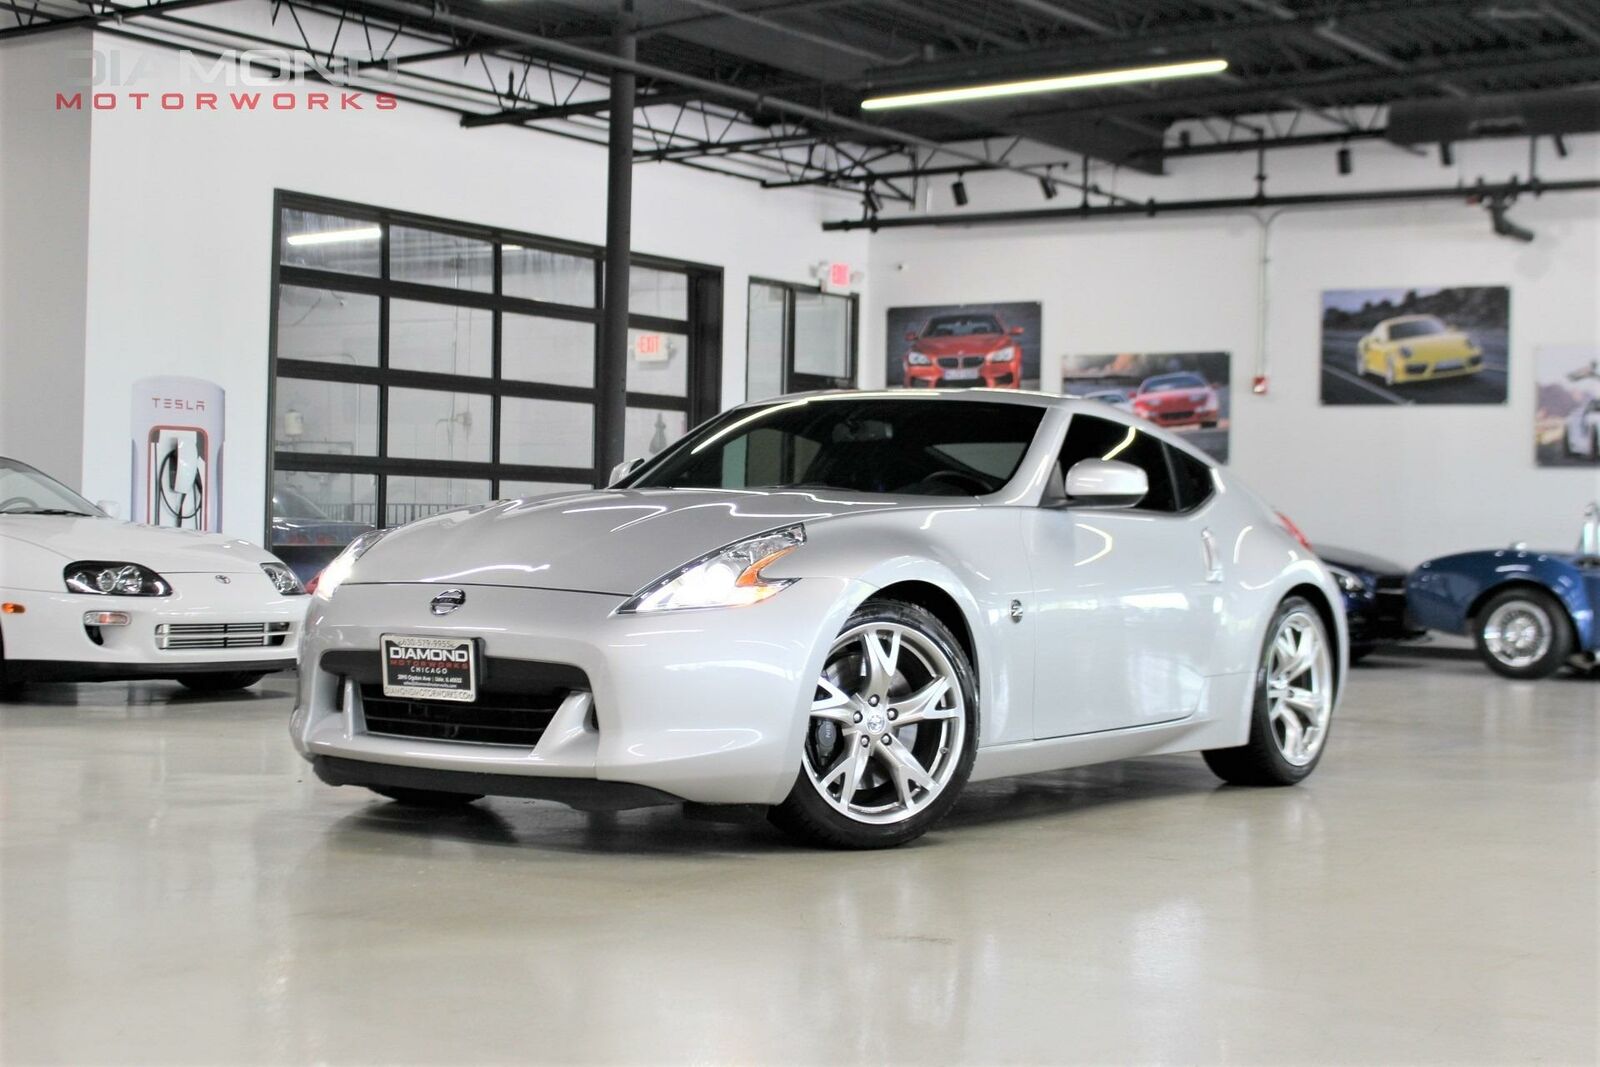 2012 Nissan 370z  2012 Nissan 370z  10743 Miles Brilliant Silver Coupe 3.7l V6 332hp 270ft. Lbs. 6